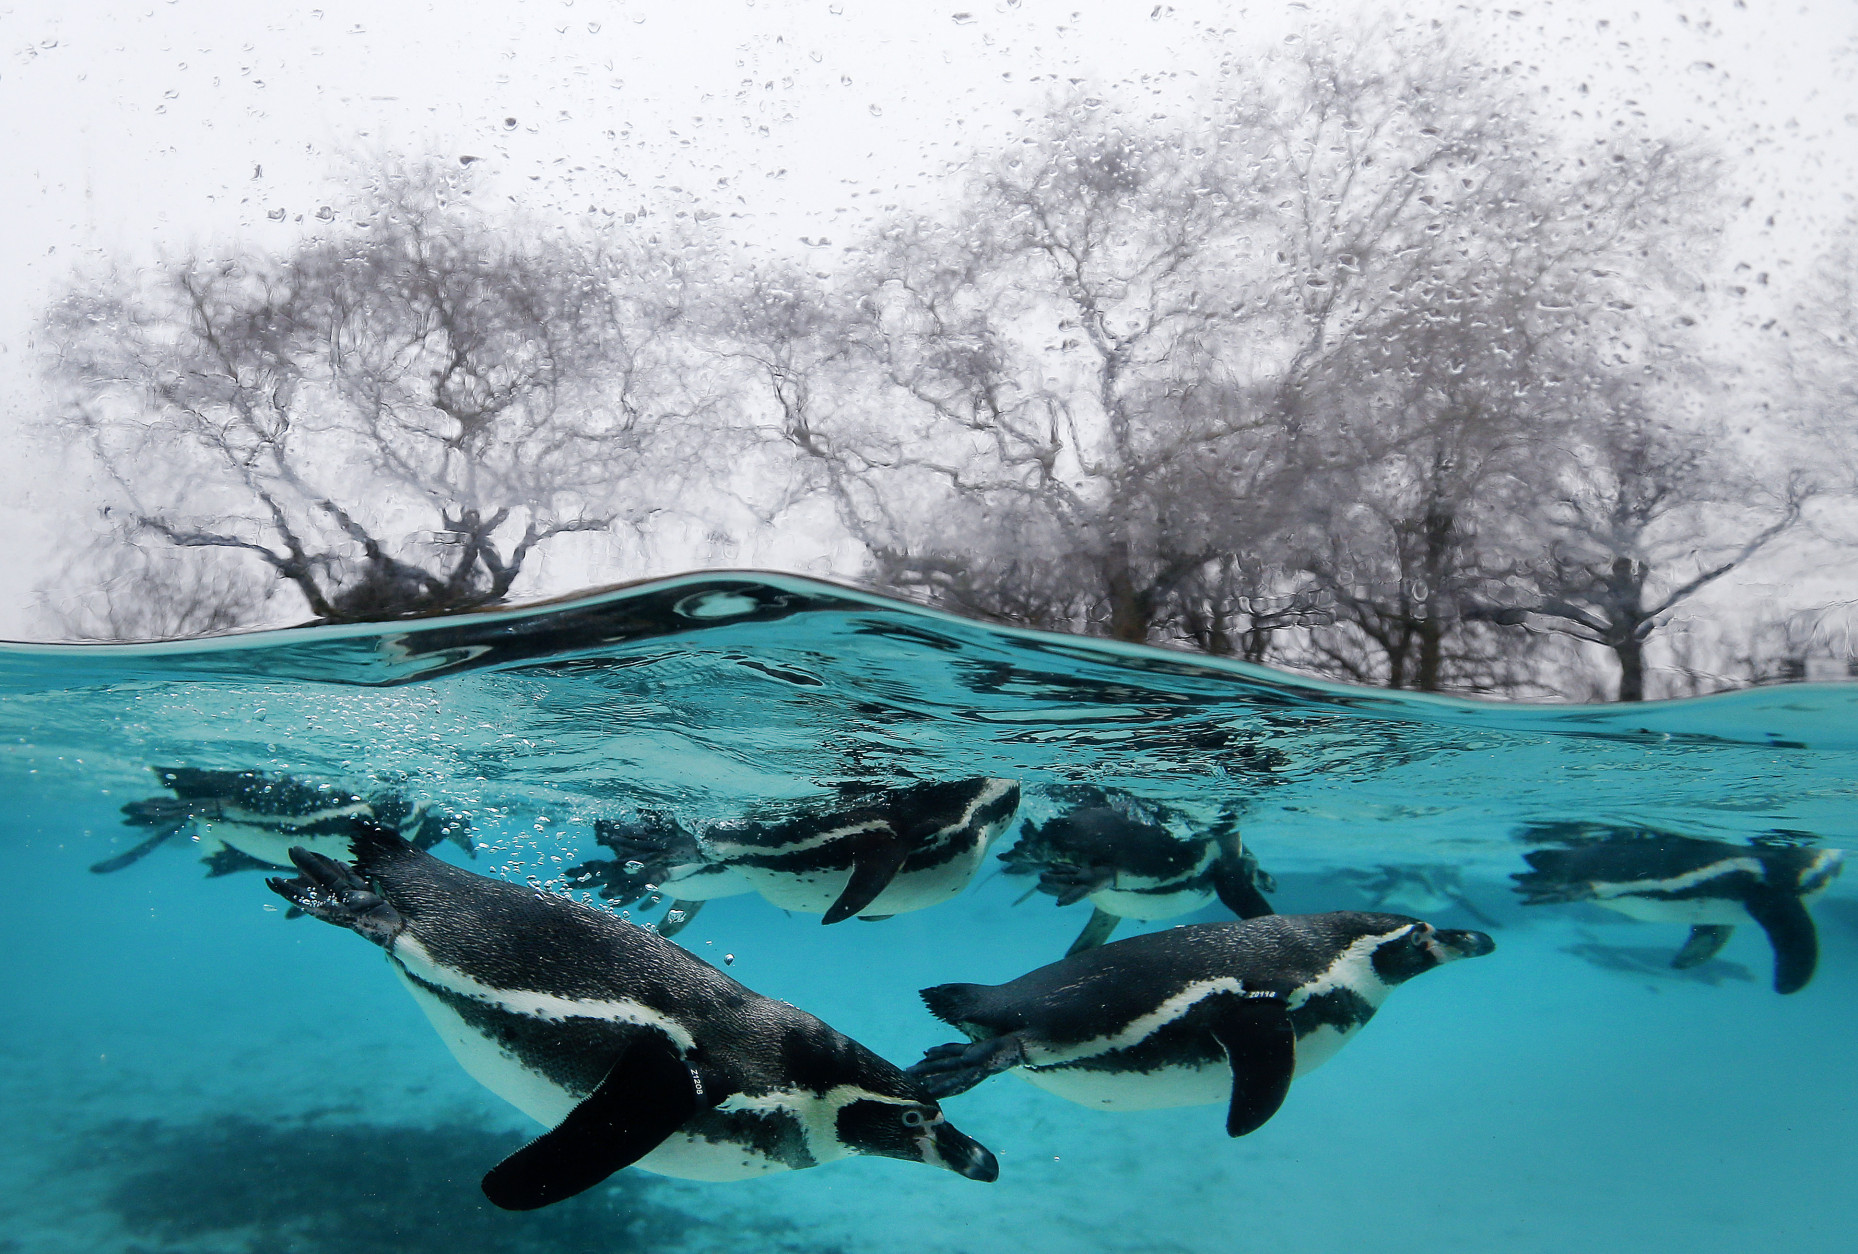 Penguins swim in their pool during the annual stock take at London Zoo, Monday, Jan. 5, 2015. Caring for more than 750 different species, London Zoo keepers started the New Year with the task of counting every single animal. With three Sumatran tiger cubs adding vital numbers to the European conservation breeding programme, the birth of six critically-endangered Philippine crocodiles and the arrival of nine Humboldt penguin chicks, all of the new additions will be added to the records. (AP Photo/Kirsty Wigglesworth)